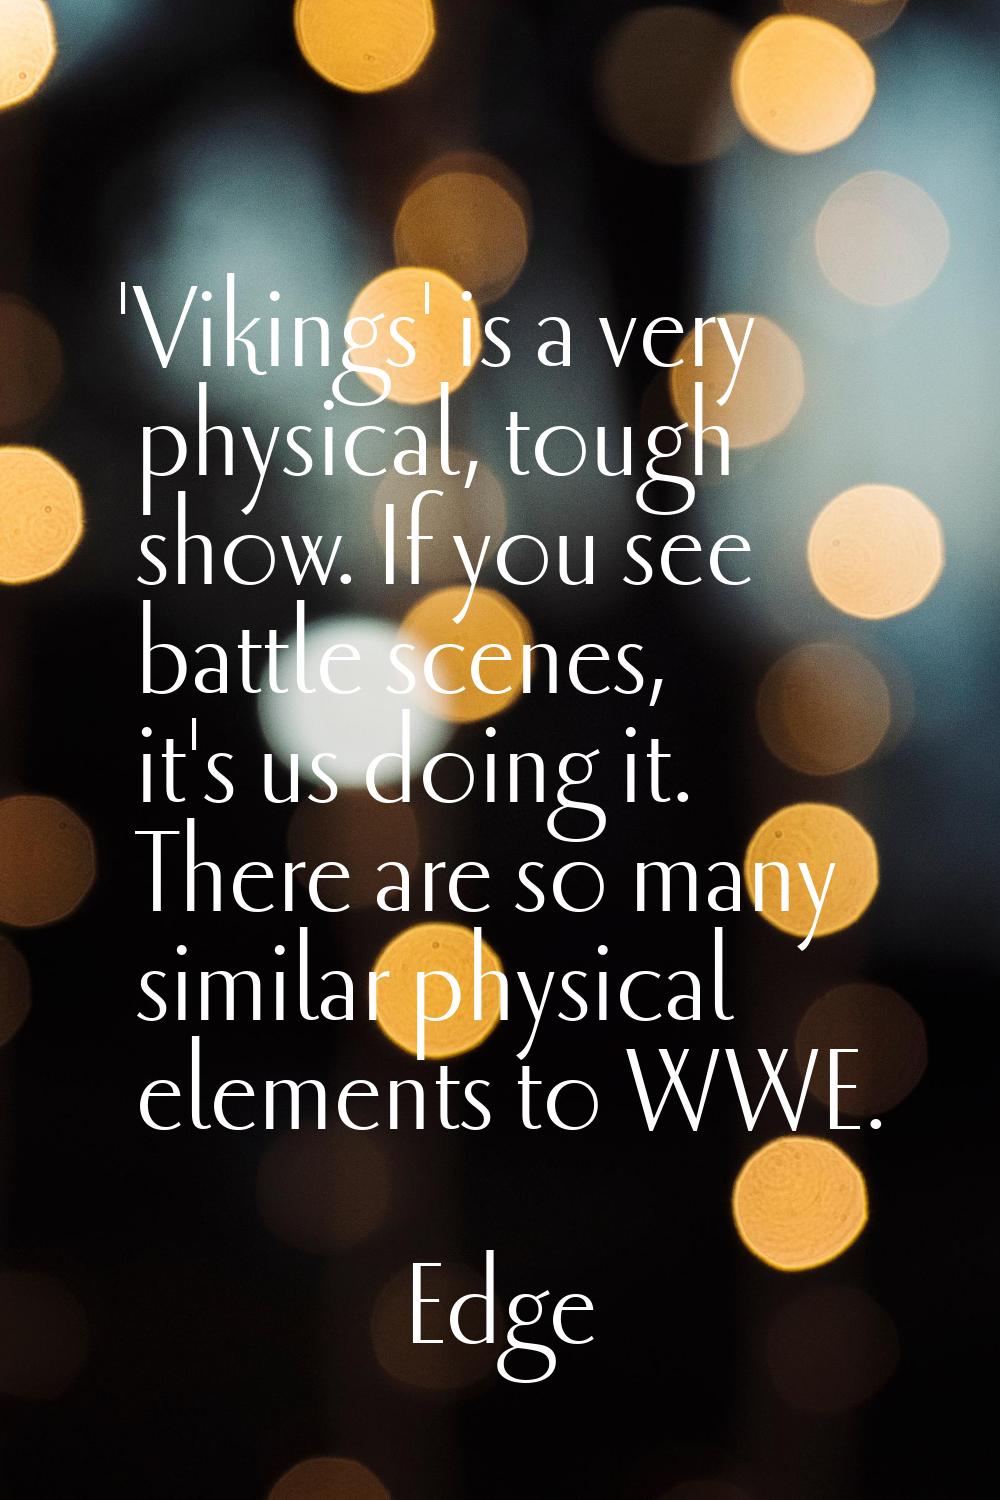 'Vikings' is a very physical, tough show. If you see battle scenes, it's us doing it. There are so 